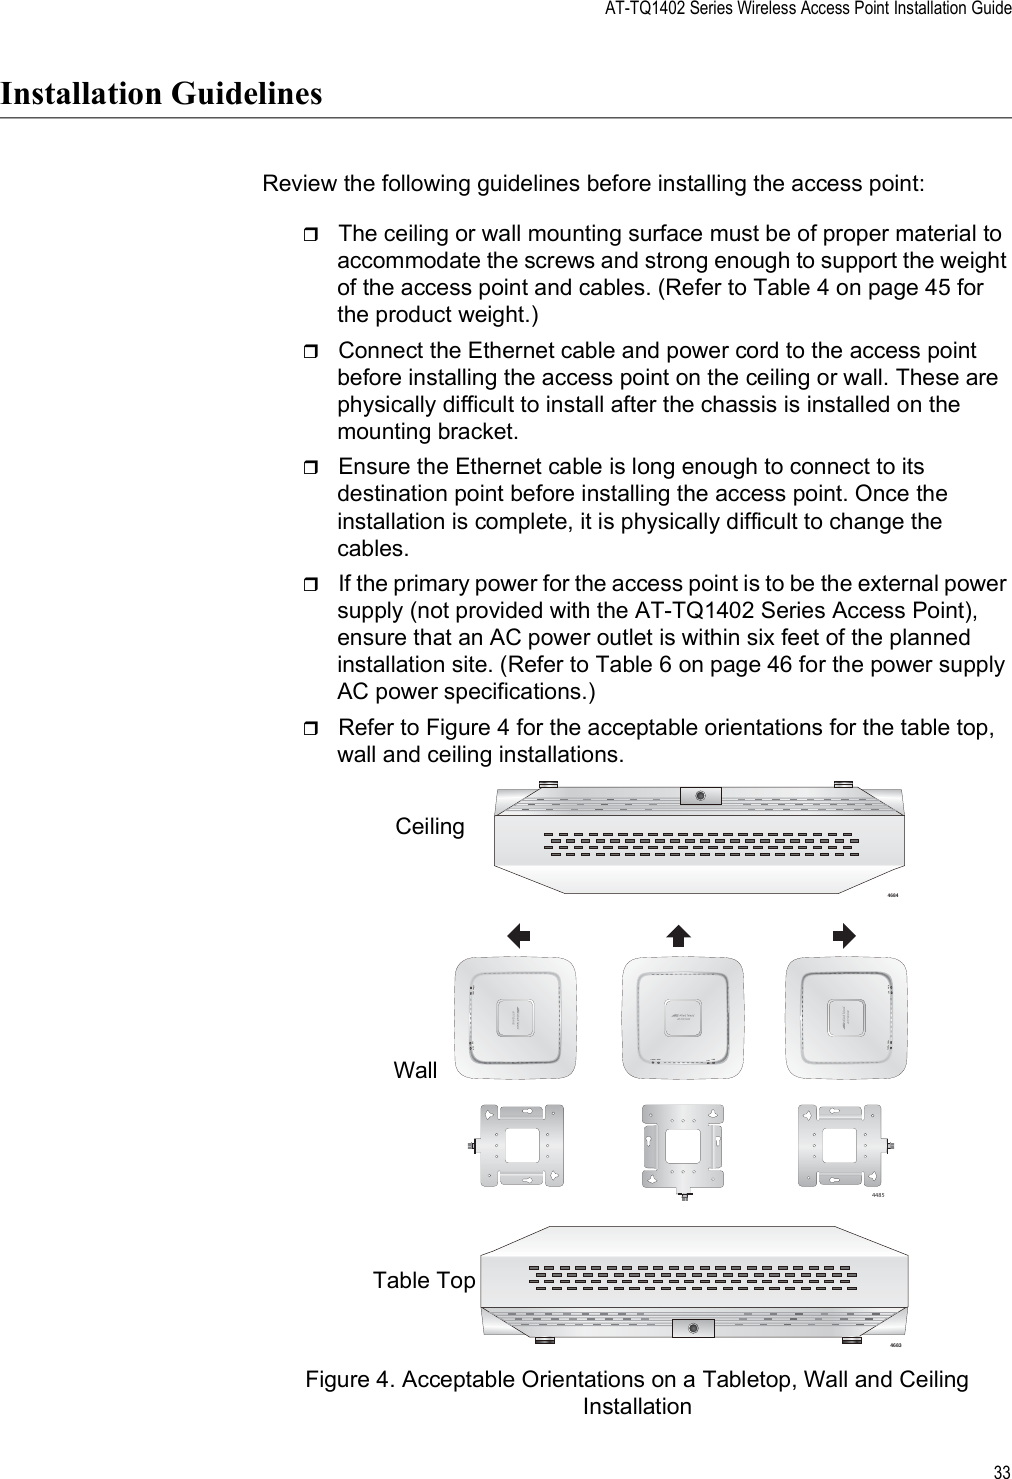 AT-TQ1402 Series Wireless Access Point Installation Guide33Installation GuidelinesReview the following guidelines before installing the access point:The ceiling or wall mounting surface must be of proper material to accommodate the screws and strong enough to support the weight of the access point and cables. (Refer to Table 4 on page 45 for the product weight.)Connect the Ethernet cable and power cord to the access point before installing the access point on the ceiling or wall. These are physically difficult to install after the chassis is installed on the mounting bracket.Ensure the Ethernet cable is long enough to connect to its destination point before installing the access point. Once the installation is complete, it is physically difficult to change the cables.If the primary power for the access point is to be the external power supply (not provided with the AT-TQ1402 Series Access Point), ensure that an AC power outlet is within six feet of the planned installation site. (Refer to Table 6 on page 46 for the power supply AC power specifications.)Refer to Figure 4 for the acceptable orientations for the table top, wall and ceiling installations.Figure 4. Acceptable Orientations on a Tabletop, Wall and Ceiling Installation4684Ceiling44855GHz2.4GHzPWRLANAT-TQ14025GHz2.4GHzPWRLANAT-TQ14025GHz2.4GHzPWRLANAT-TQ1402Wall4683Table Top